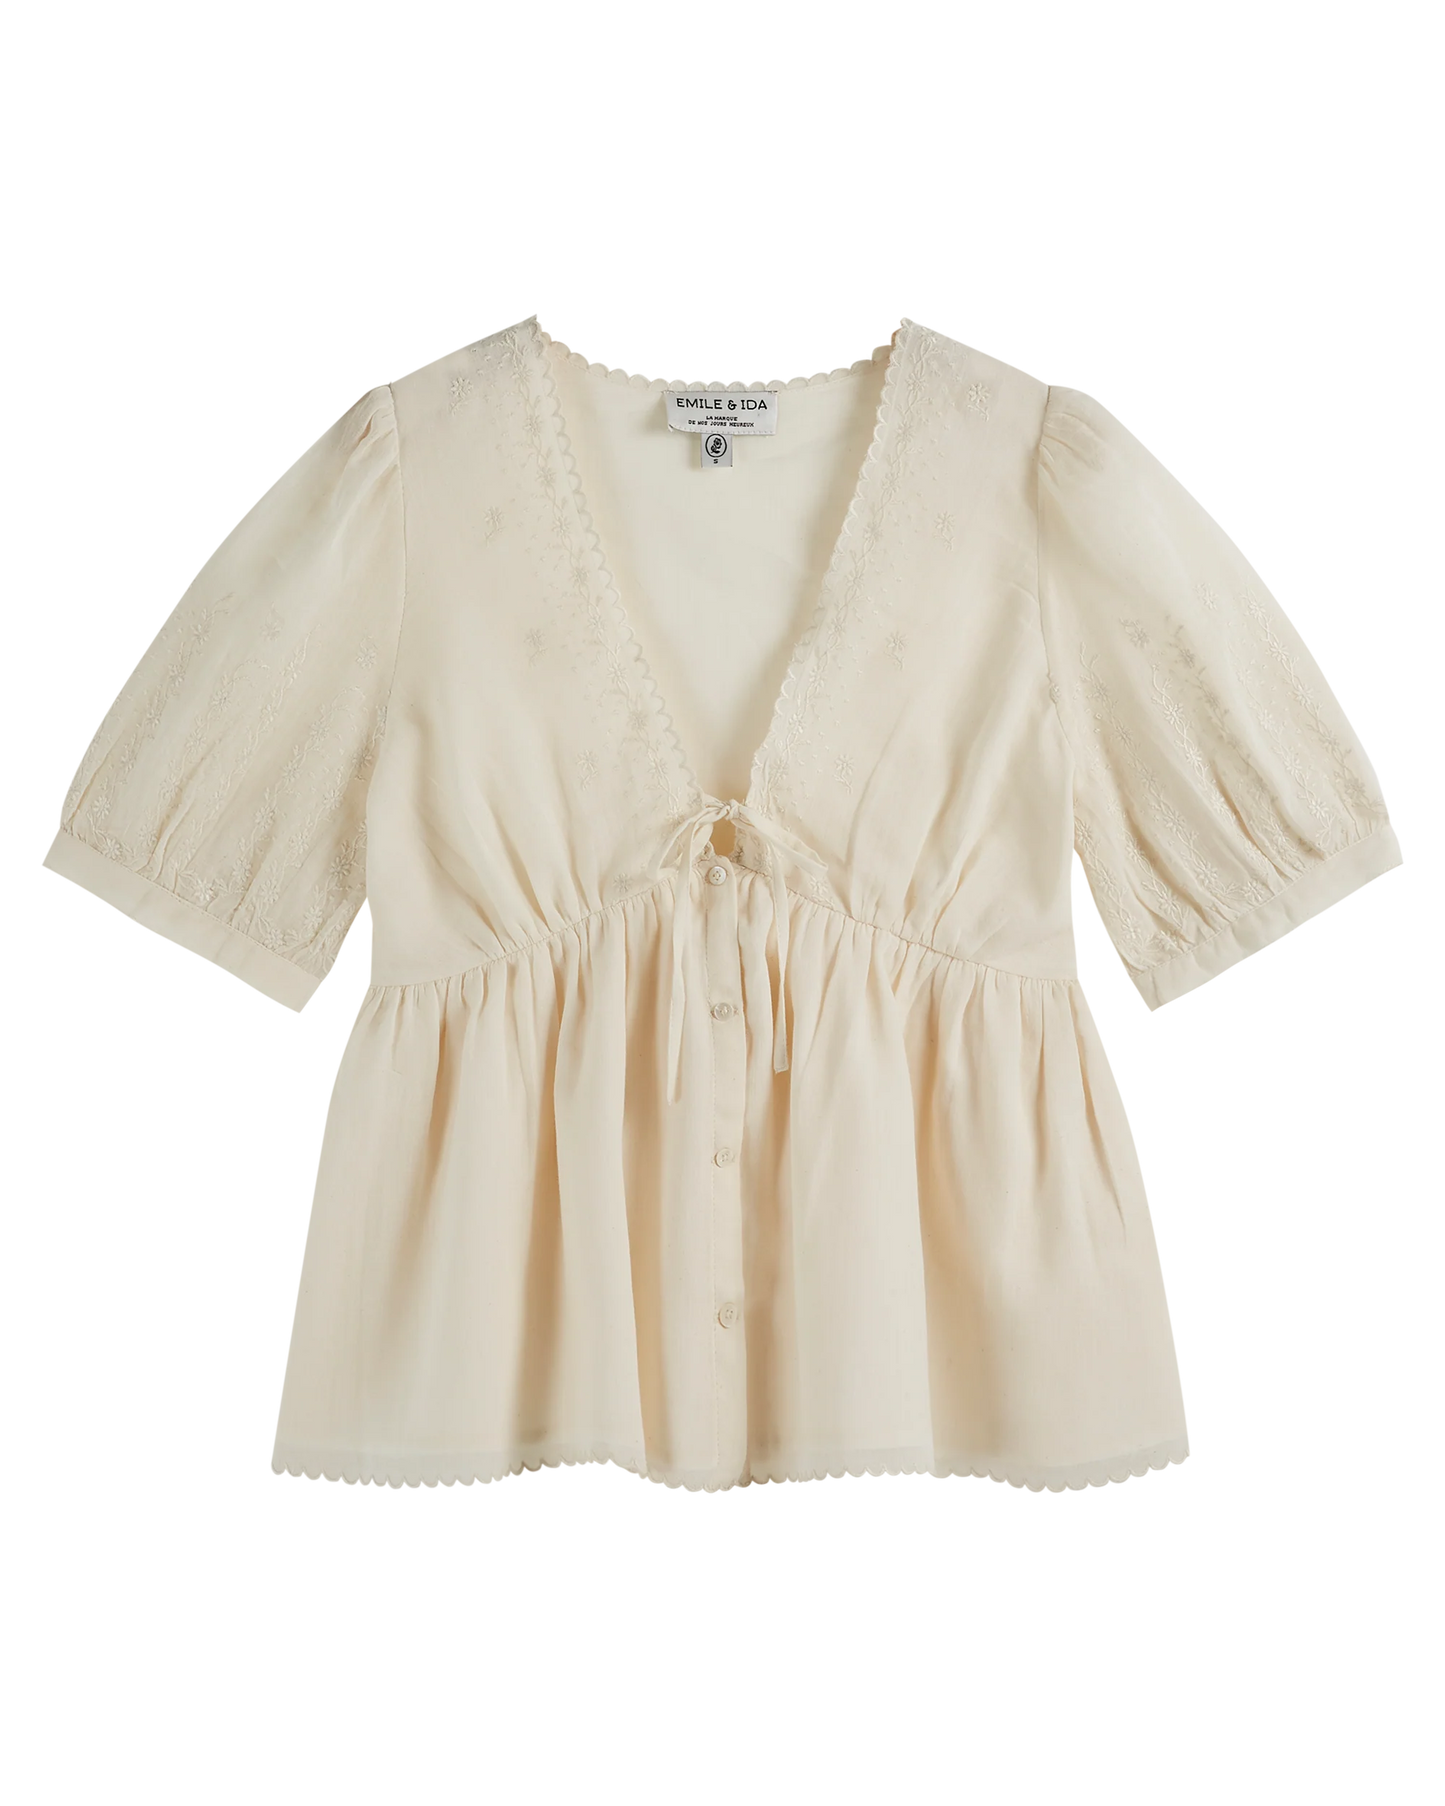 Zorica vintage brodee blouse - Chantilly